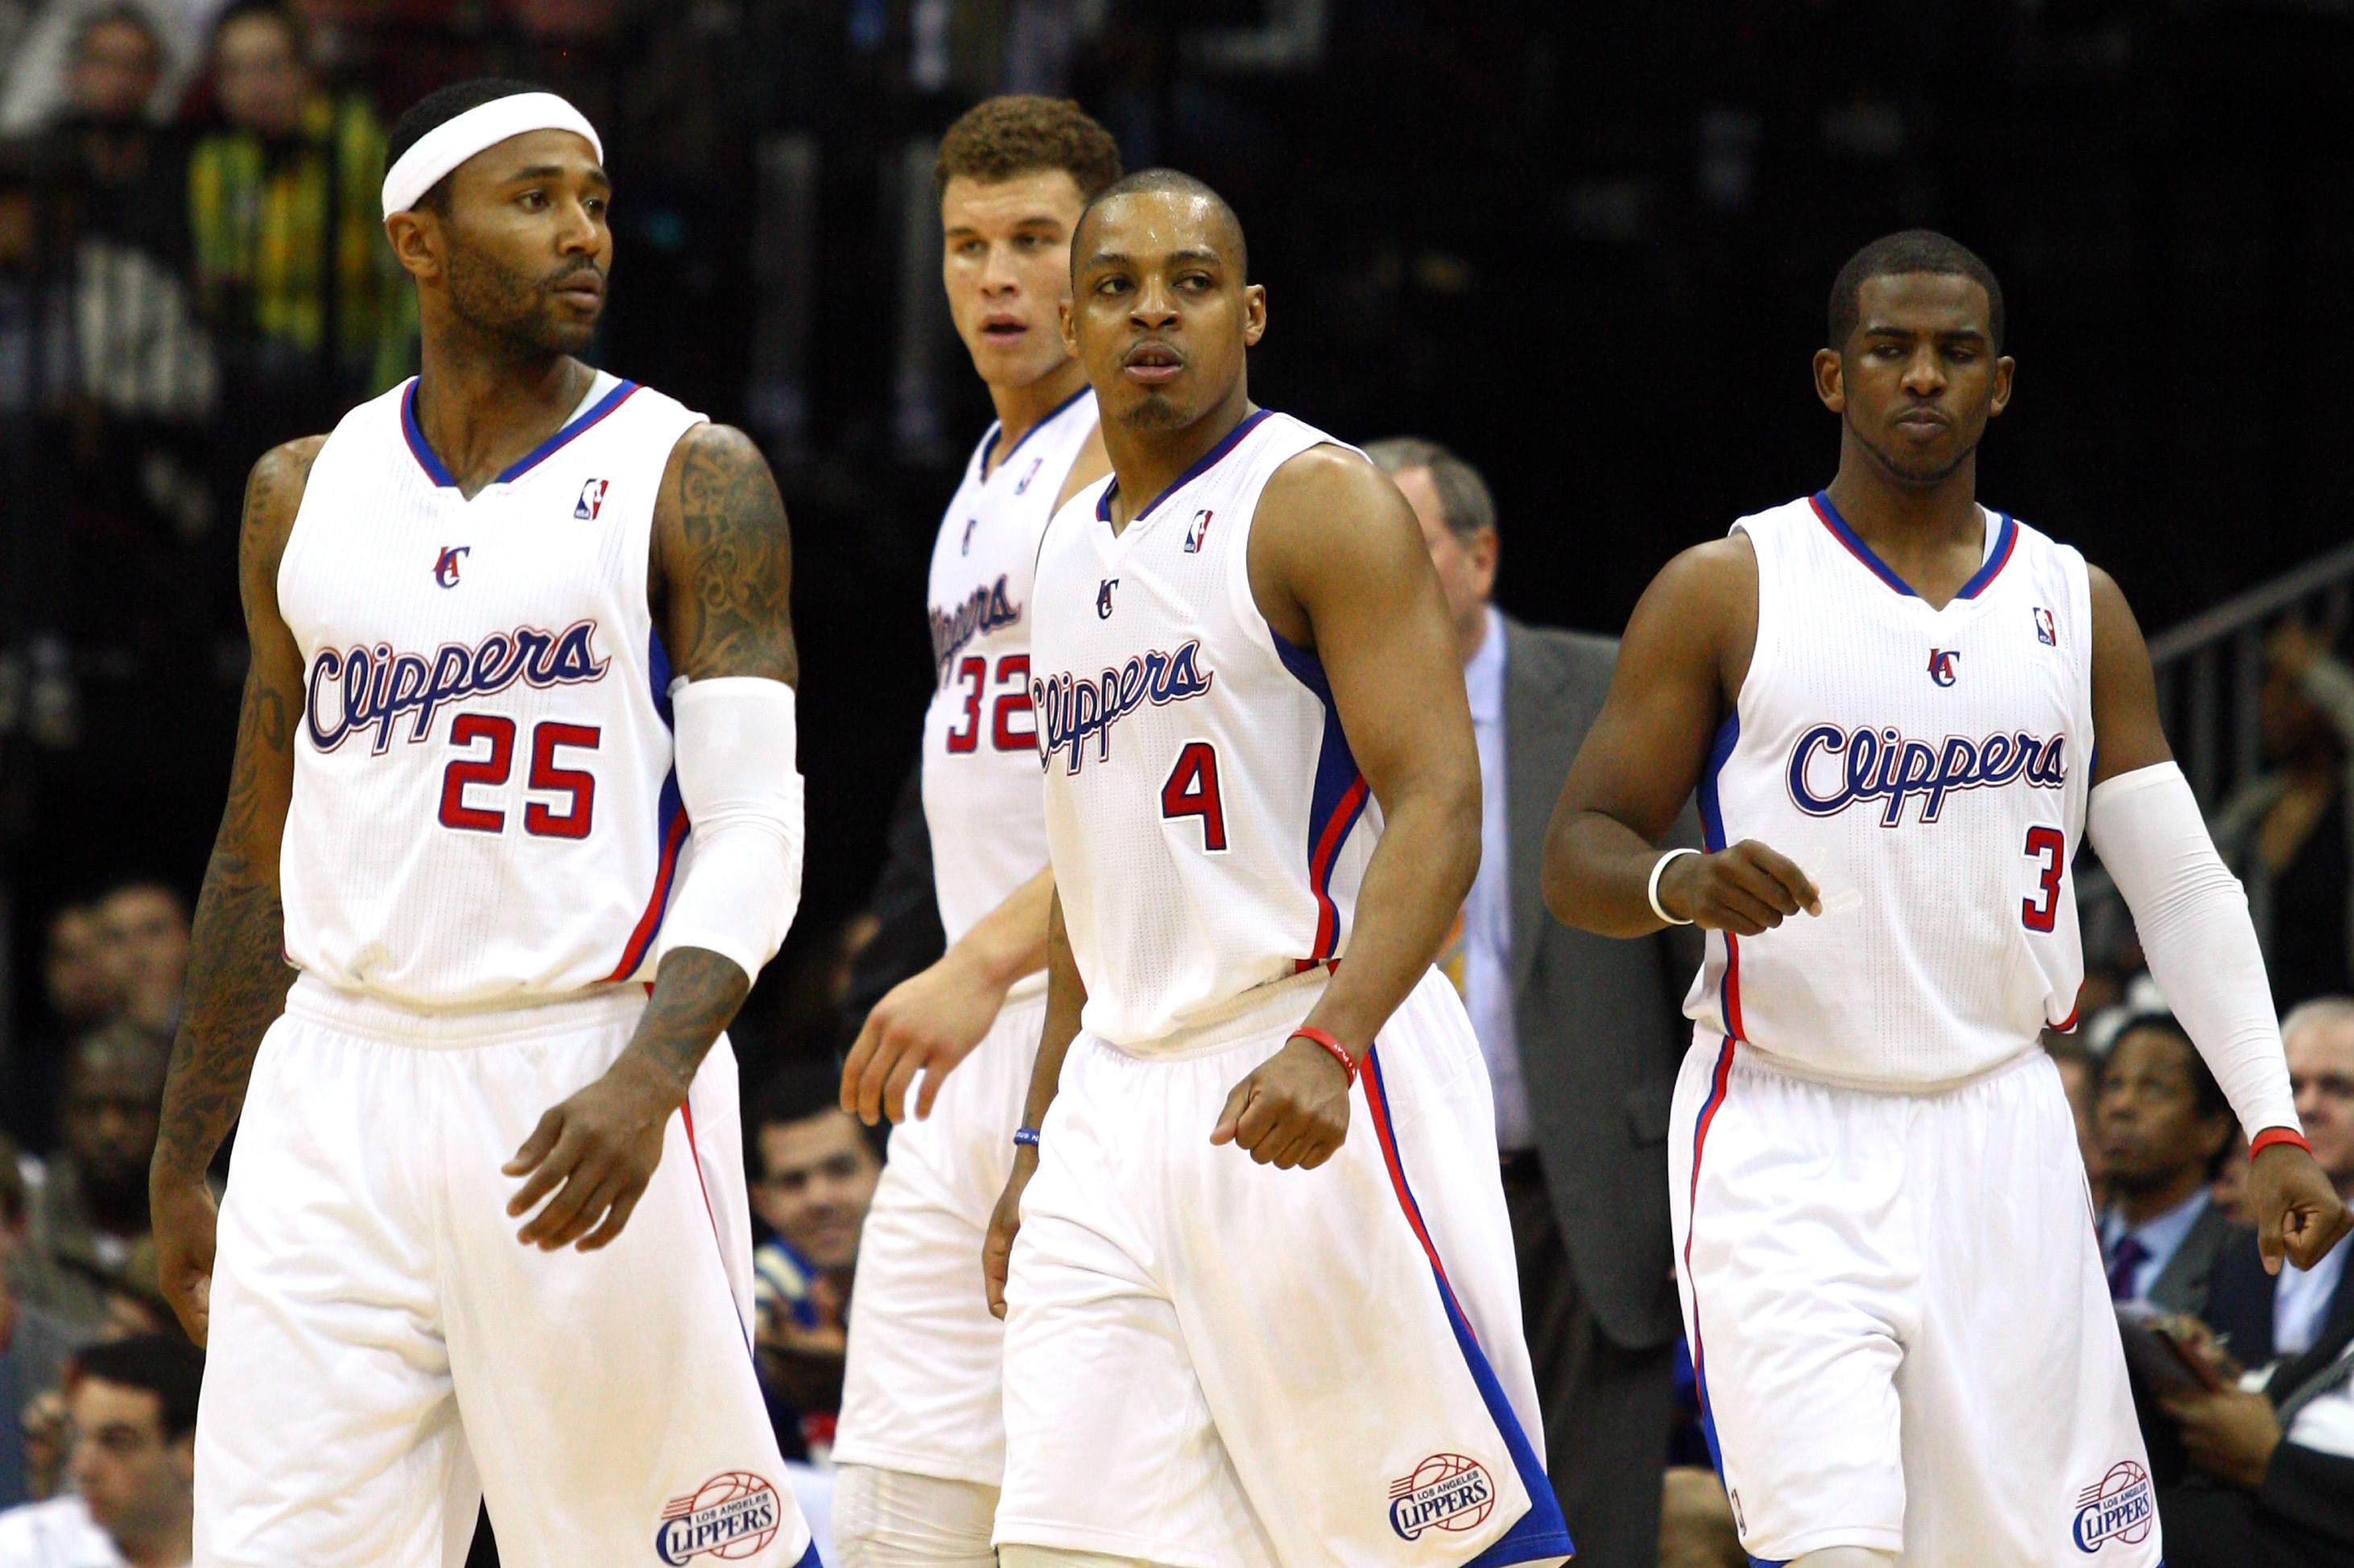 Los Angeles Clippers Fans: NBA's Most Loyal - WSJ